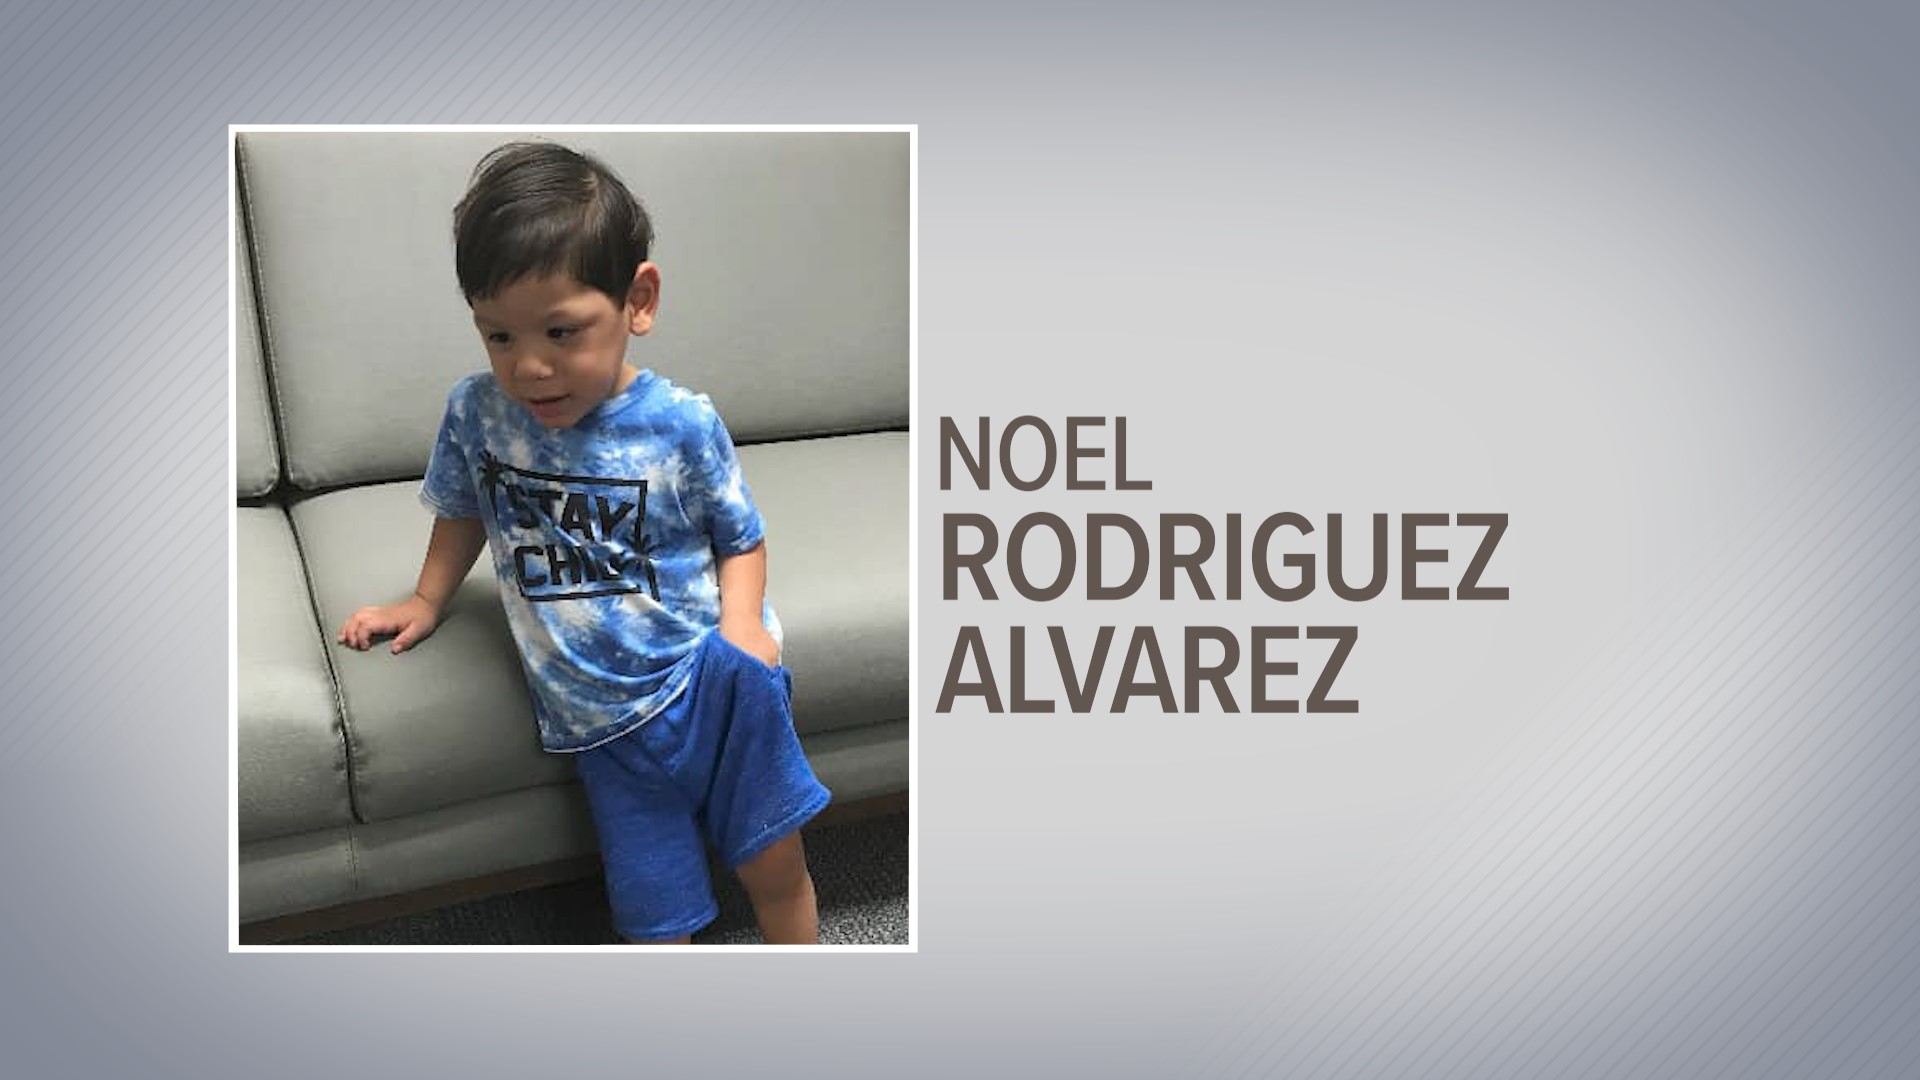 Everman police say Noel Rodriguez-Alvarez is still missing after his family fled the country on a Turkish Airlines flight on March 23.